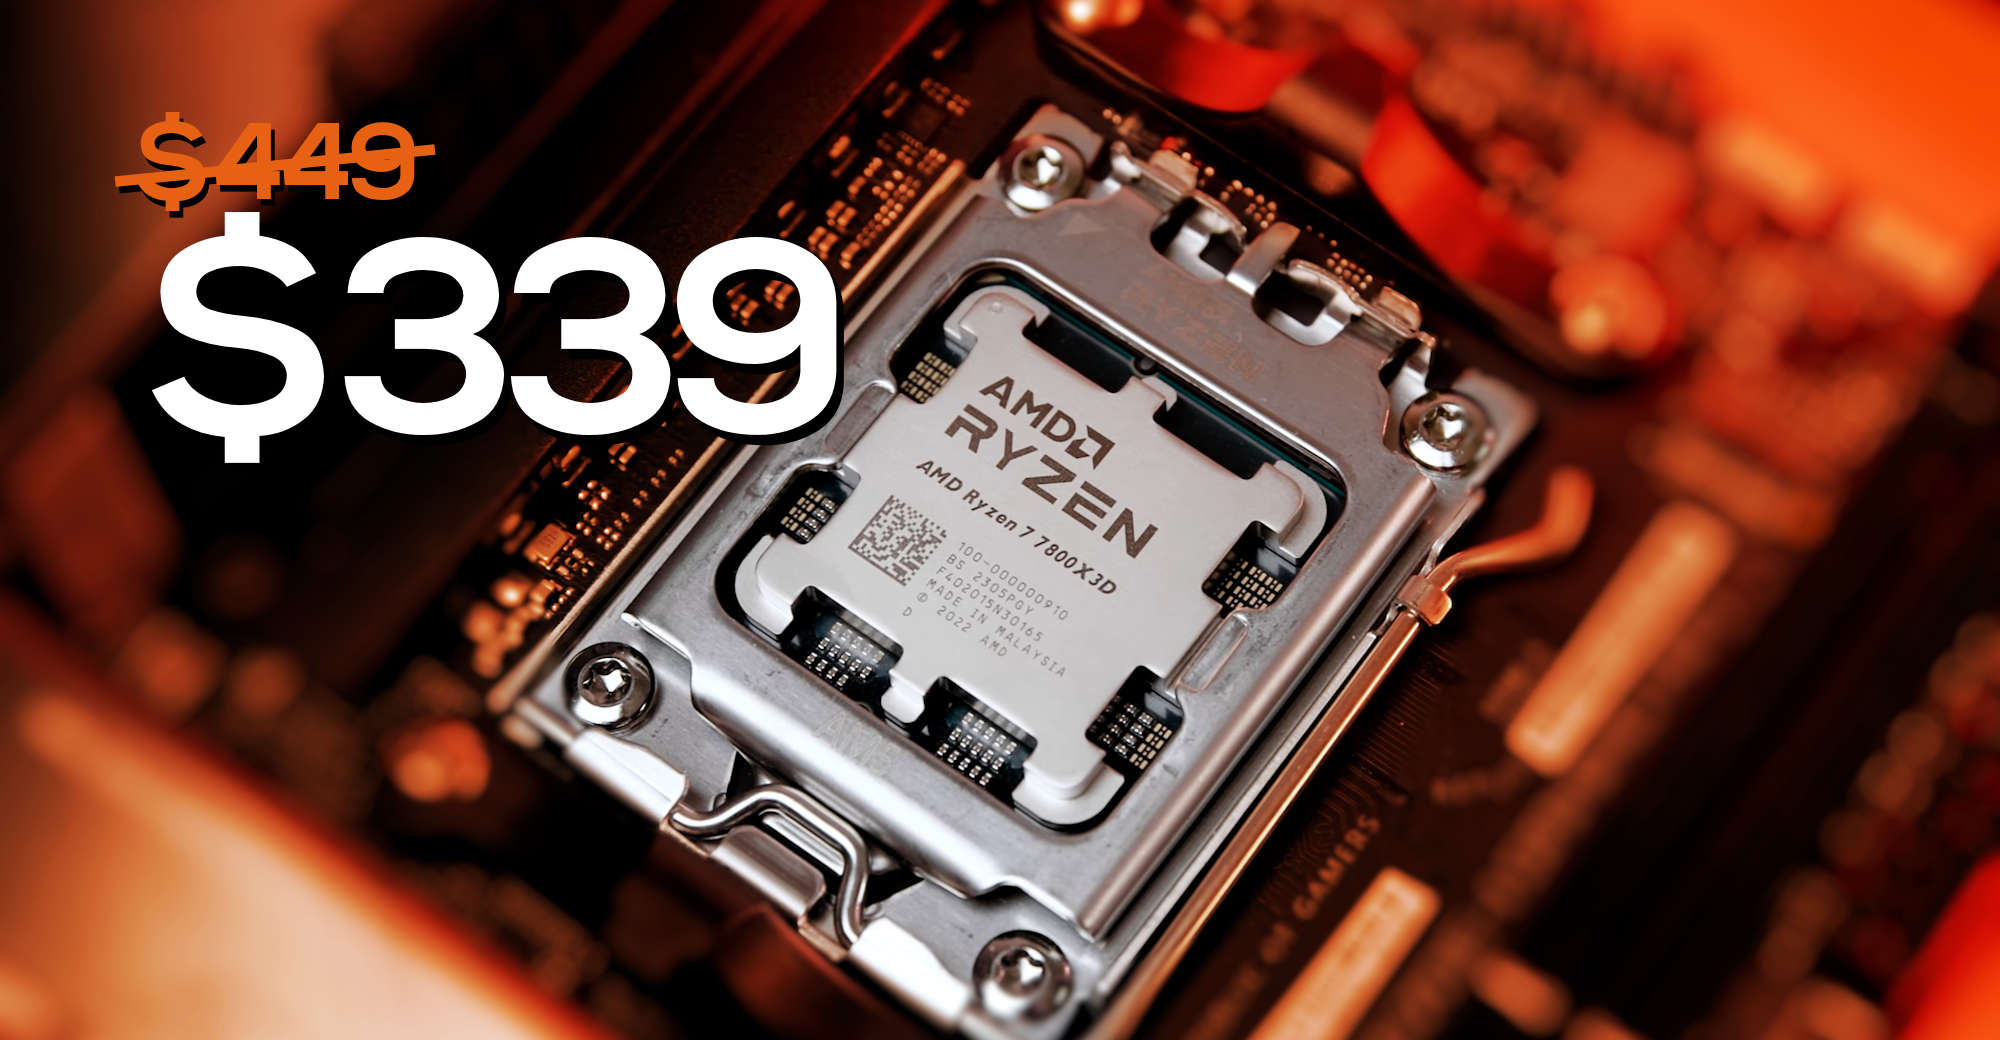 Ryzen 7 7800X3D, AMD's best CPU for gaming is now available for $339 